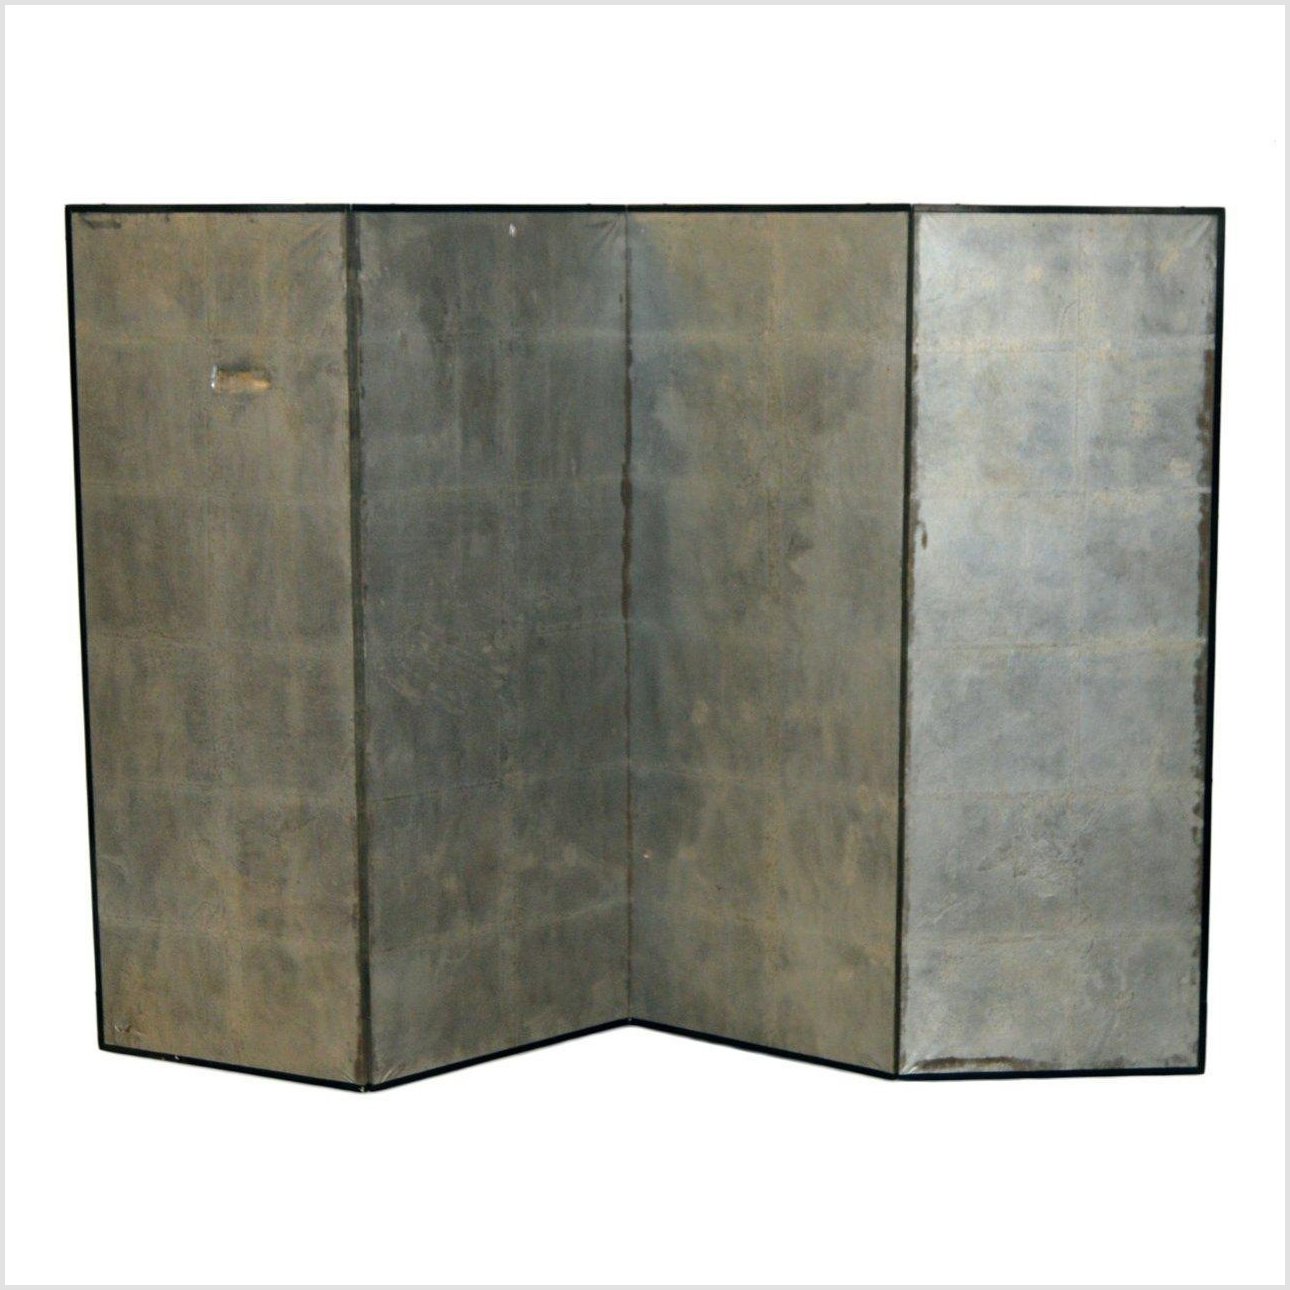 4-Panel Distressed Look Screen-YN2801-1. Asian & Chinese Furniture, Art, Antiques, Vintage Home Décor for sale at FEA Home